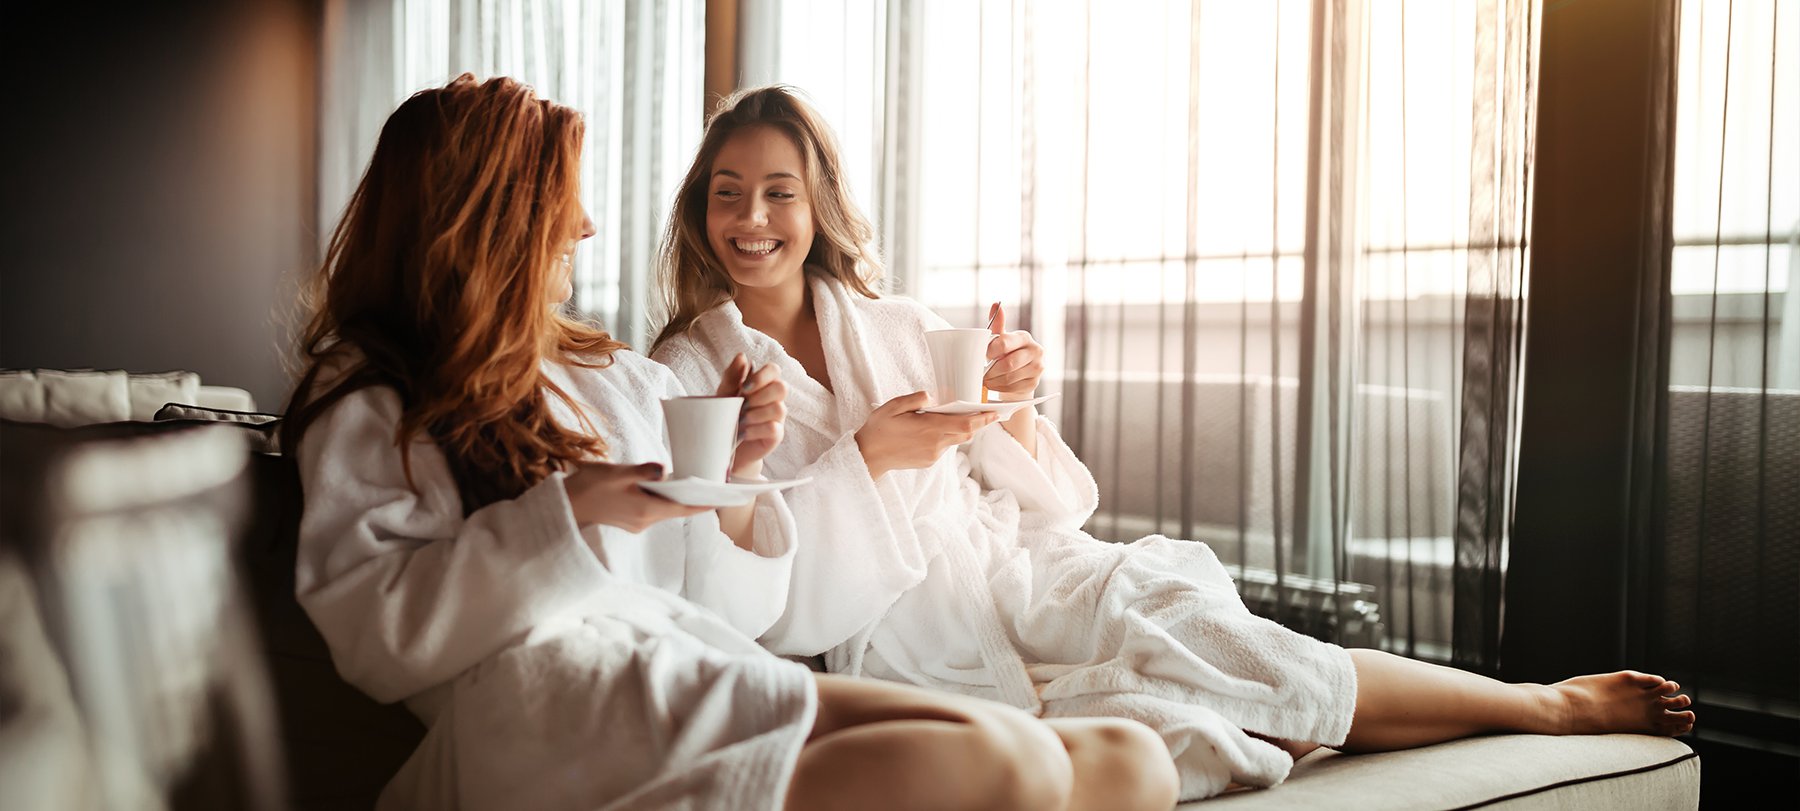 5-step home ritual so you can indulge in a little self-care